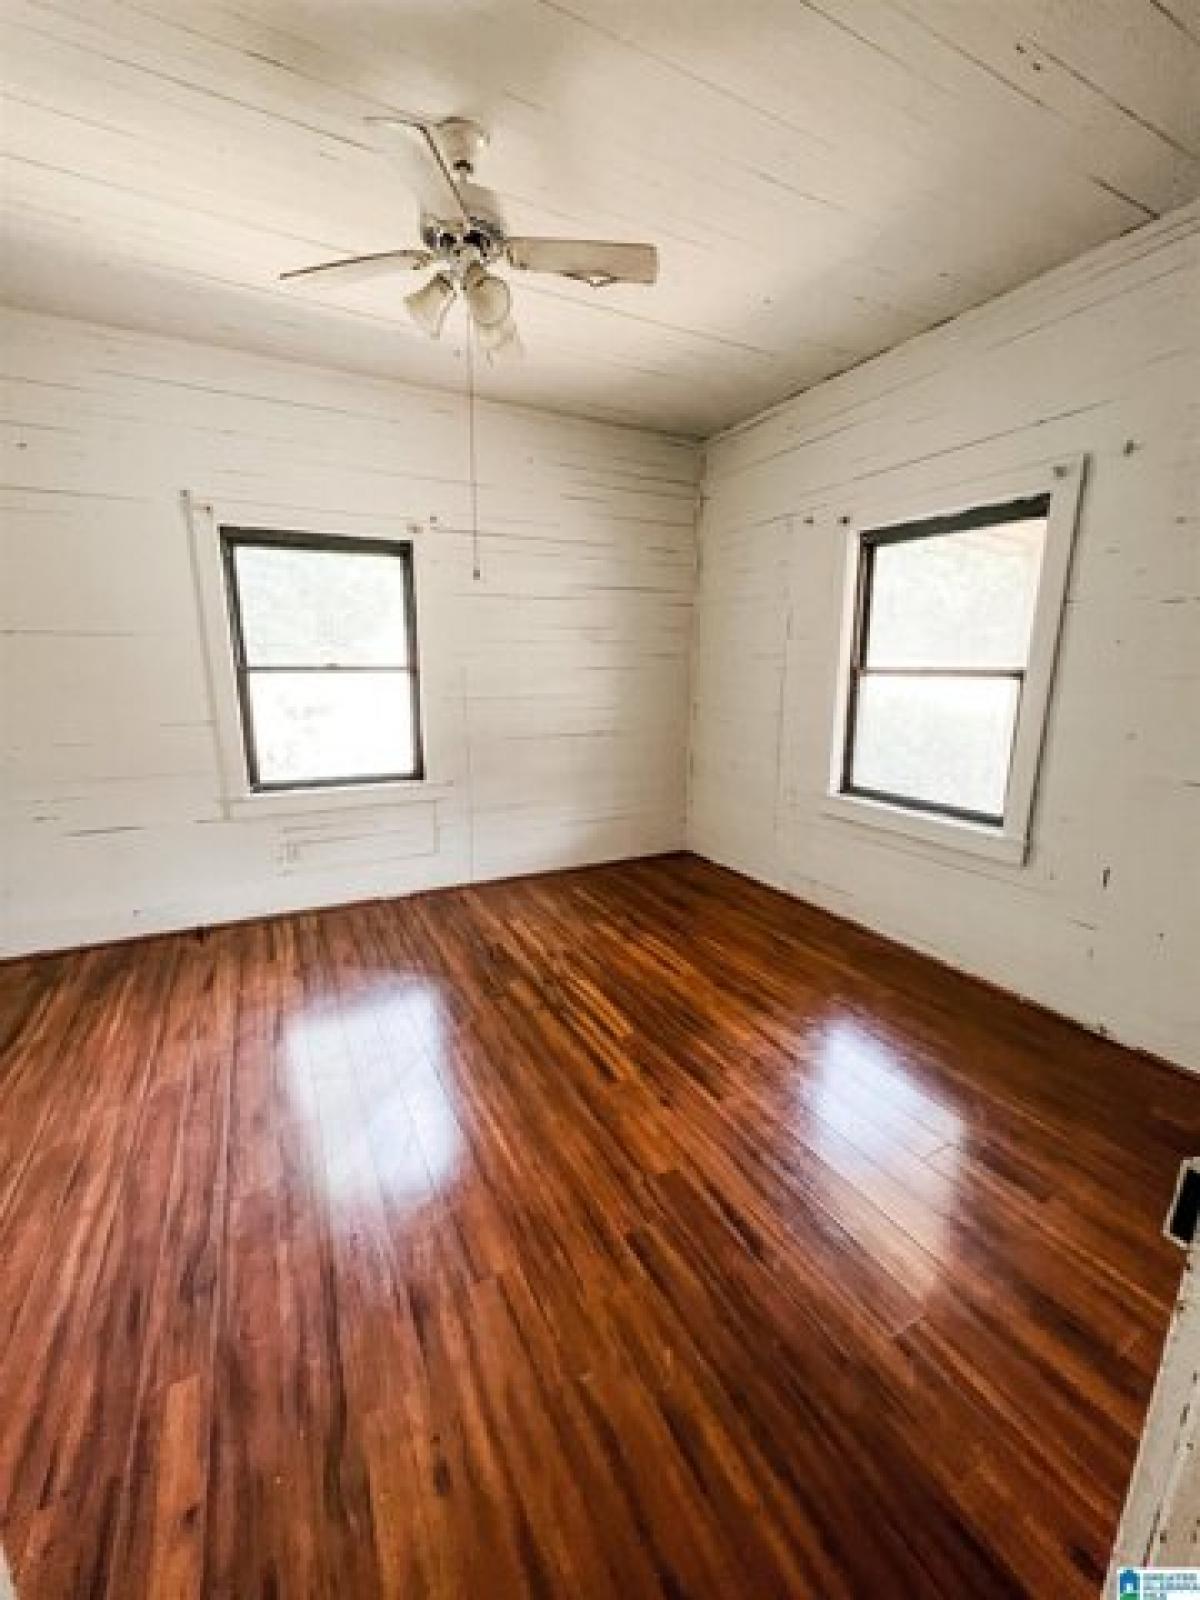 Picture of Home For Sale in Dothan, Alabama, United States